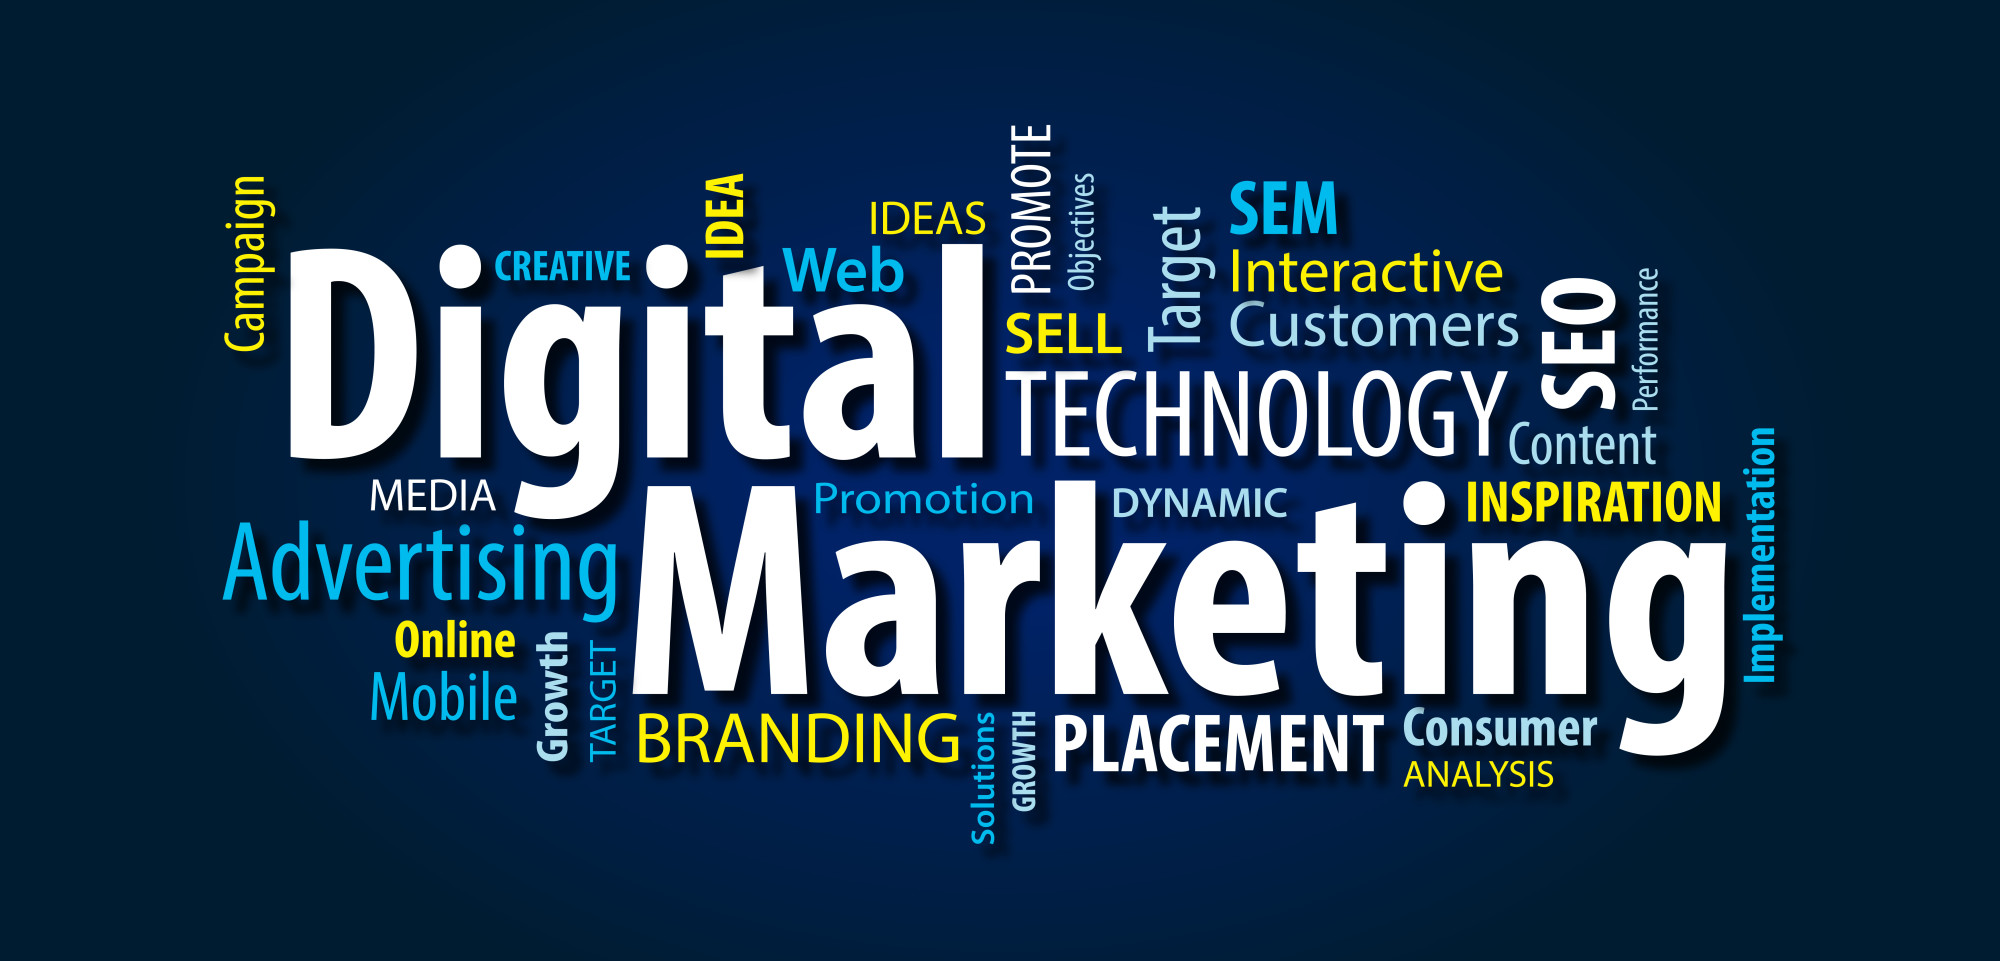 What Are The Benefits Of Digital Marketing For Your Company